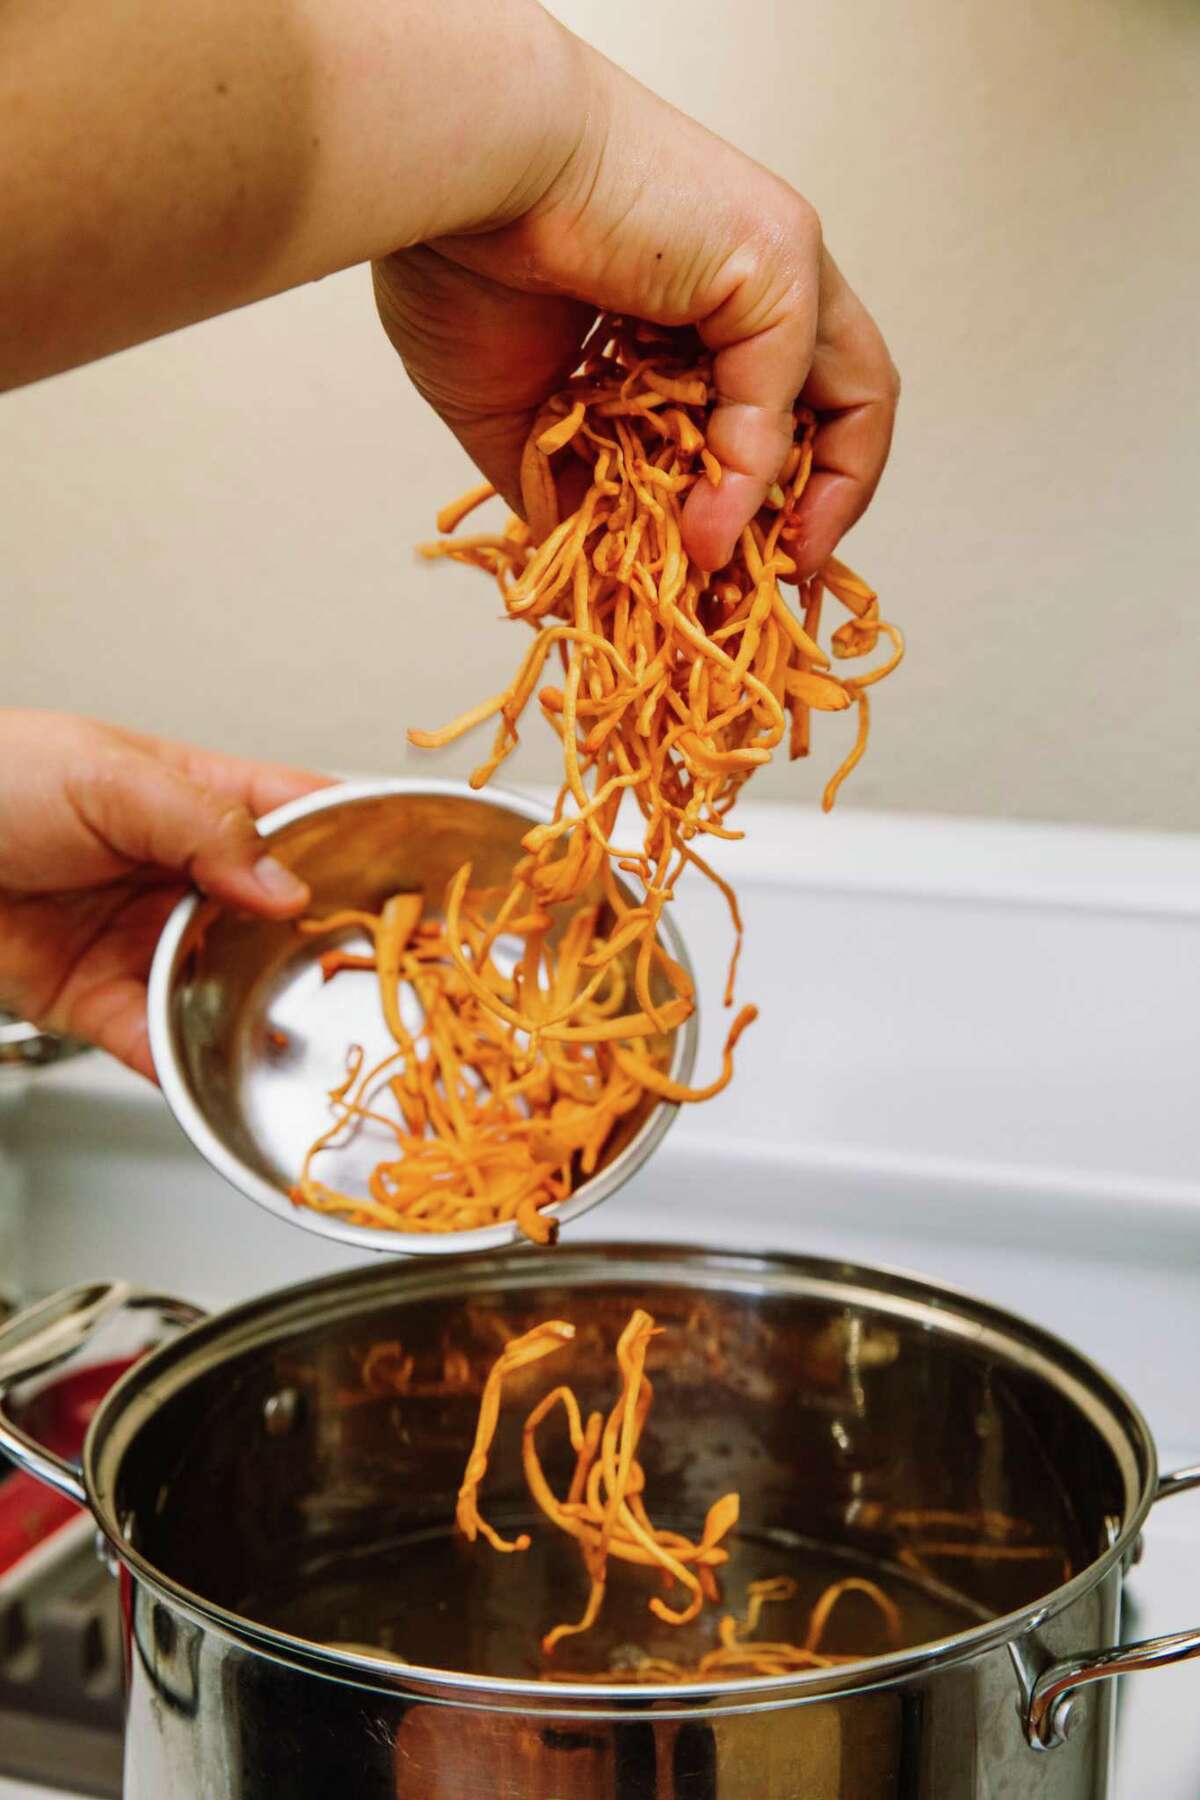 Nancy Chang, owner of Purpose & Hope, adds cordyceps to miso-based soup in the kitchen of her Oakland home.